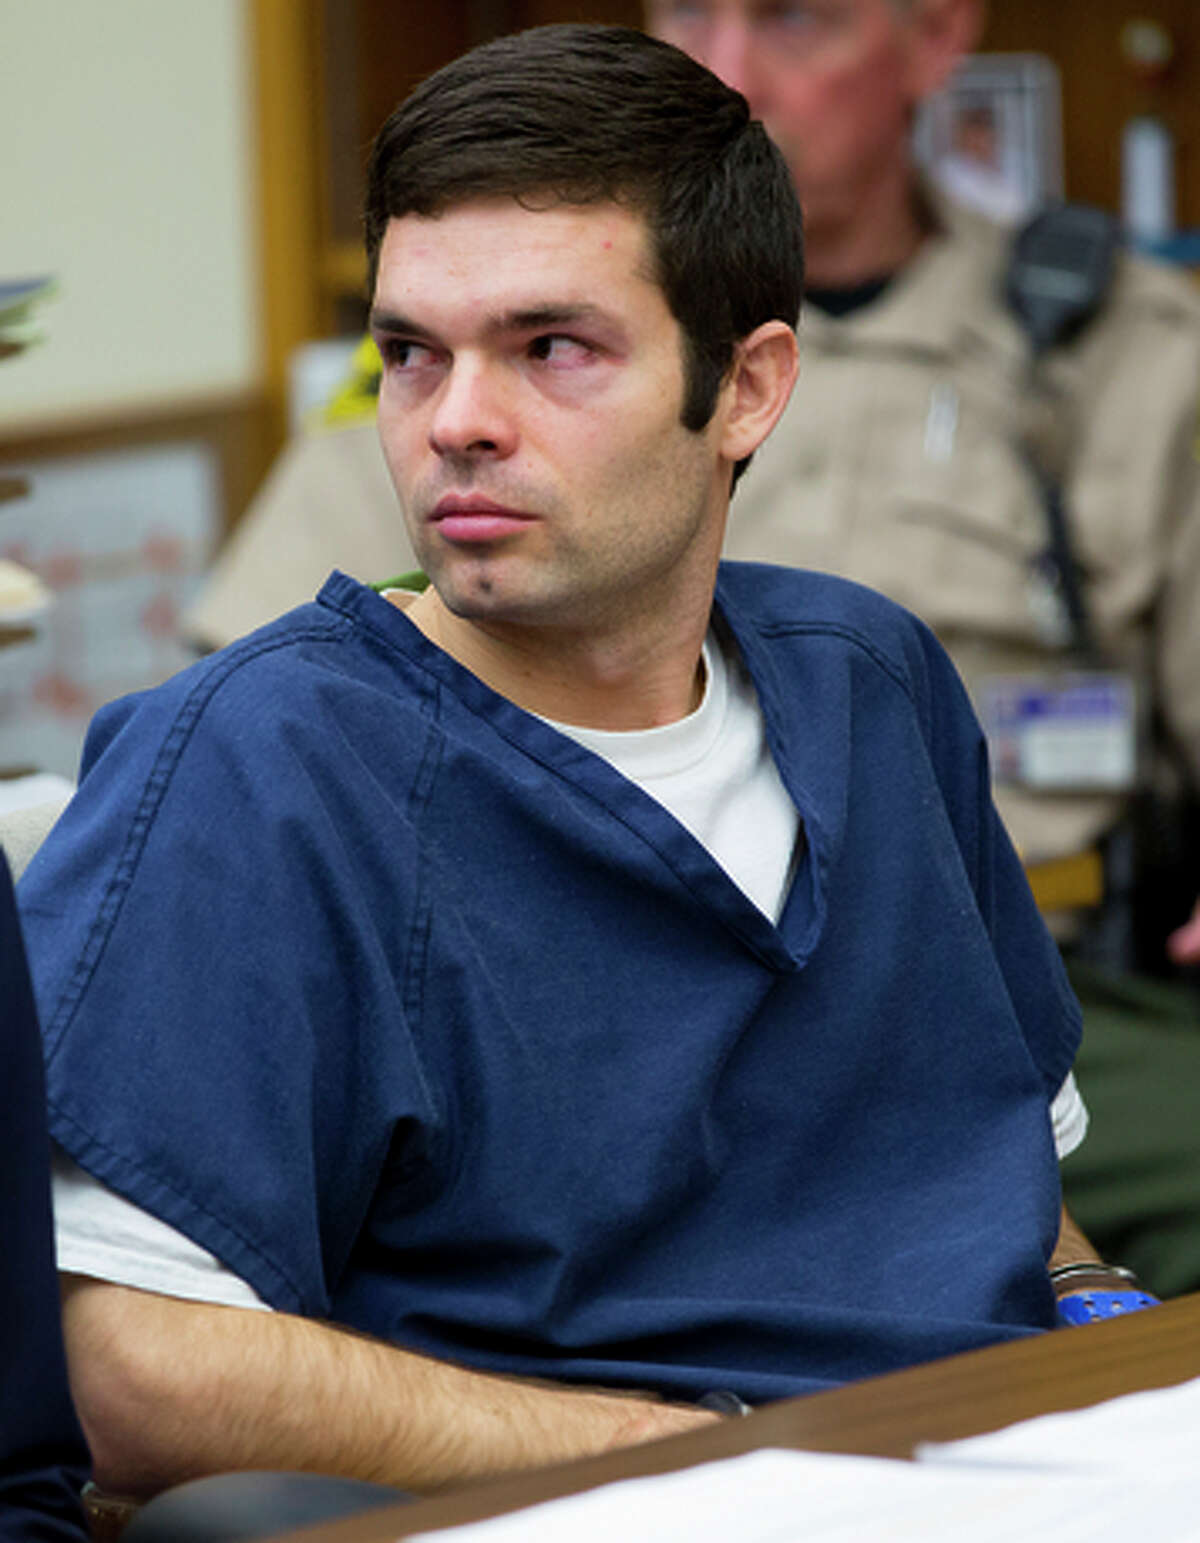 Kevin Christopher Bollaert, 28, sits in court during his sentencing hearing in San Diego on Friday.